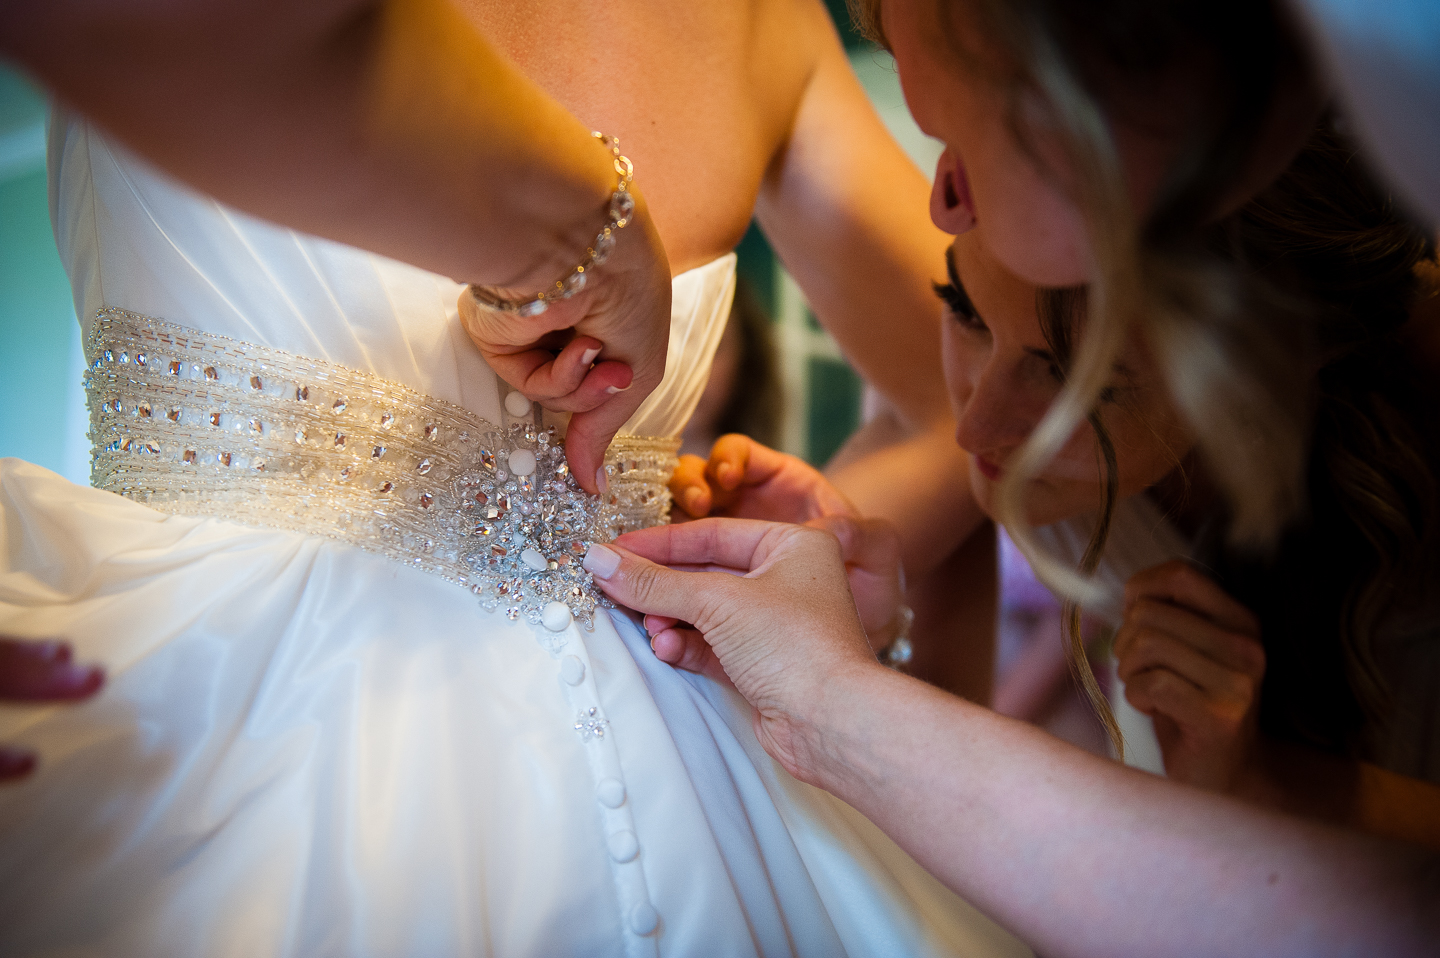 helping hands fasten the last few buttons on the brides gorgeous wedding gown